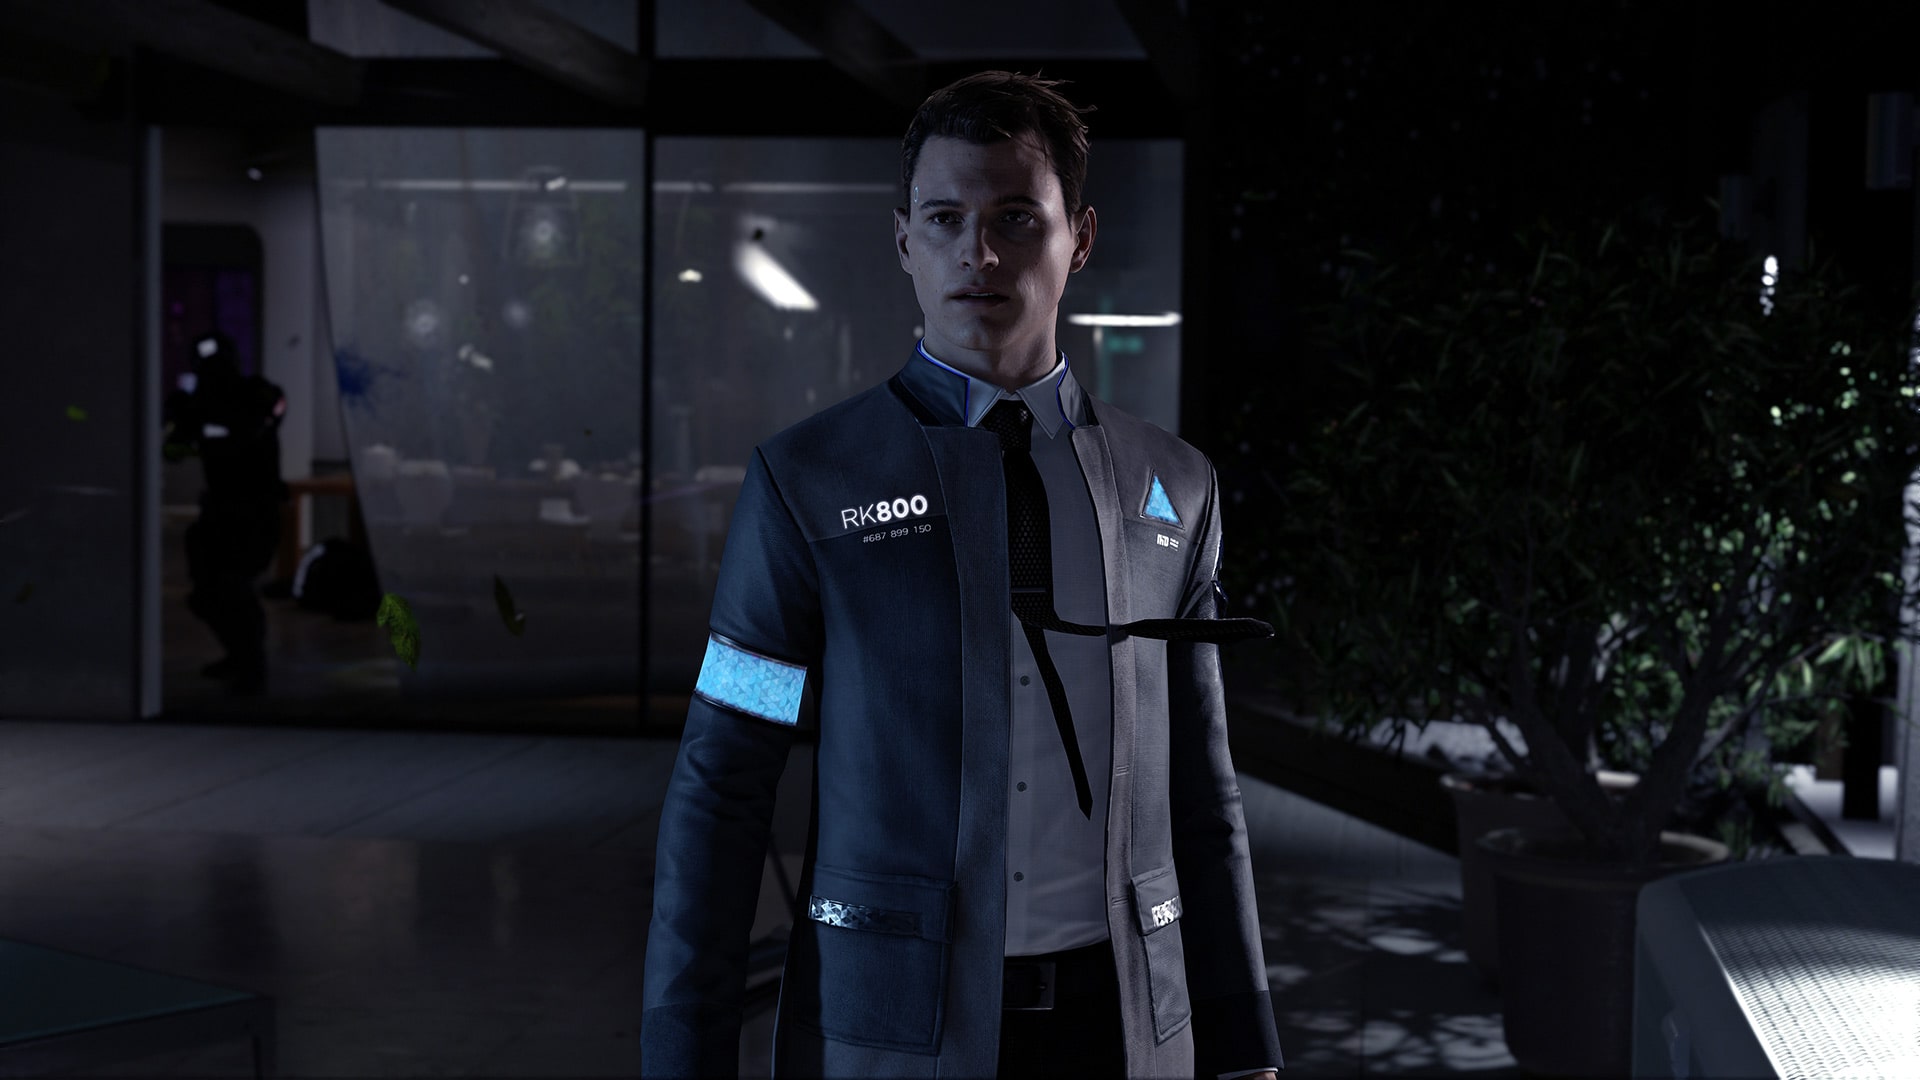 Detroit: Become Human - Sony PlayStation 4 [PS4 Interactive Story